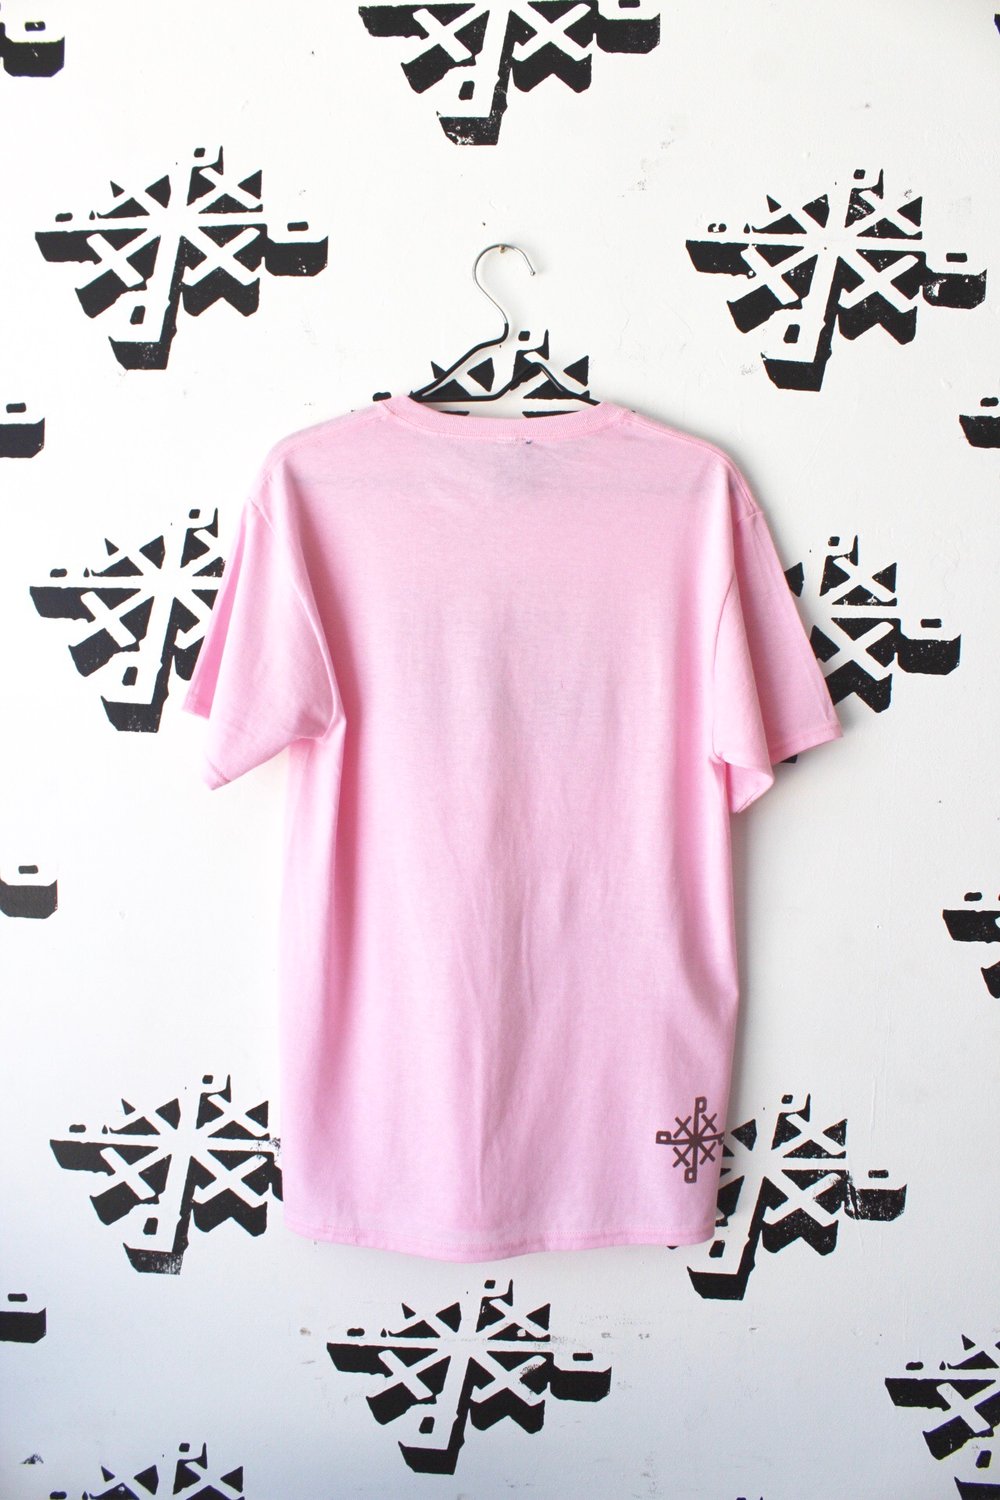 win either way tee in pink 